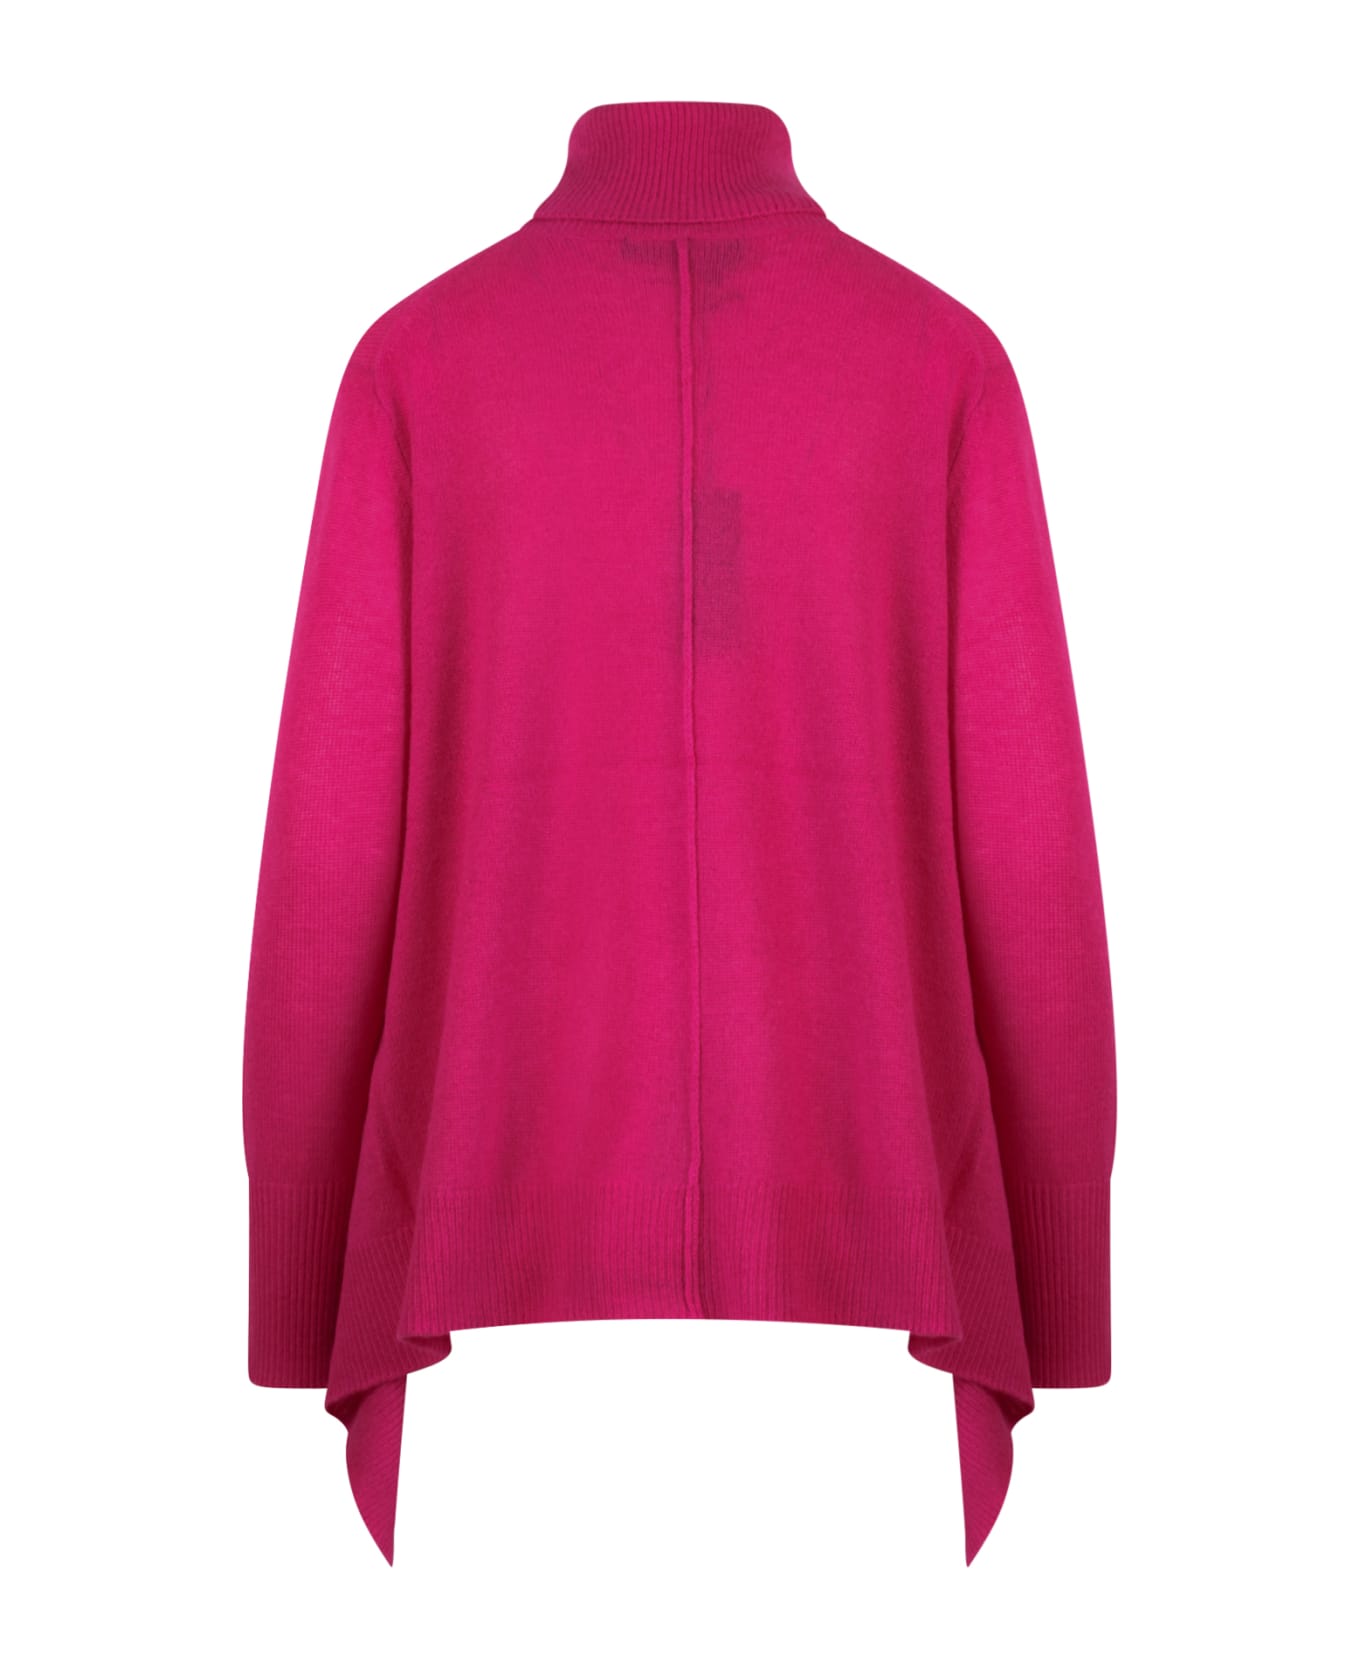 360Cashmere Sweater - Pink